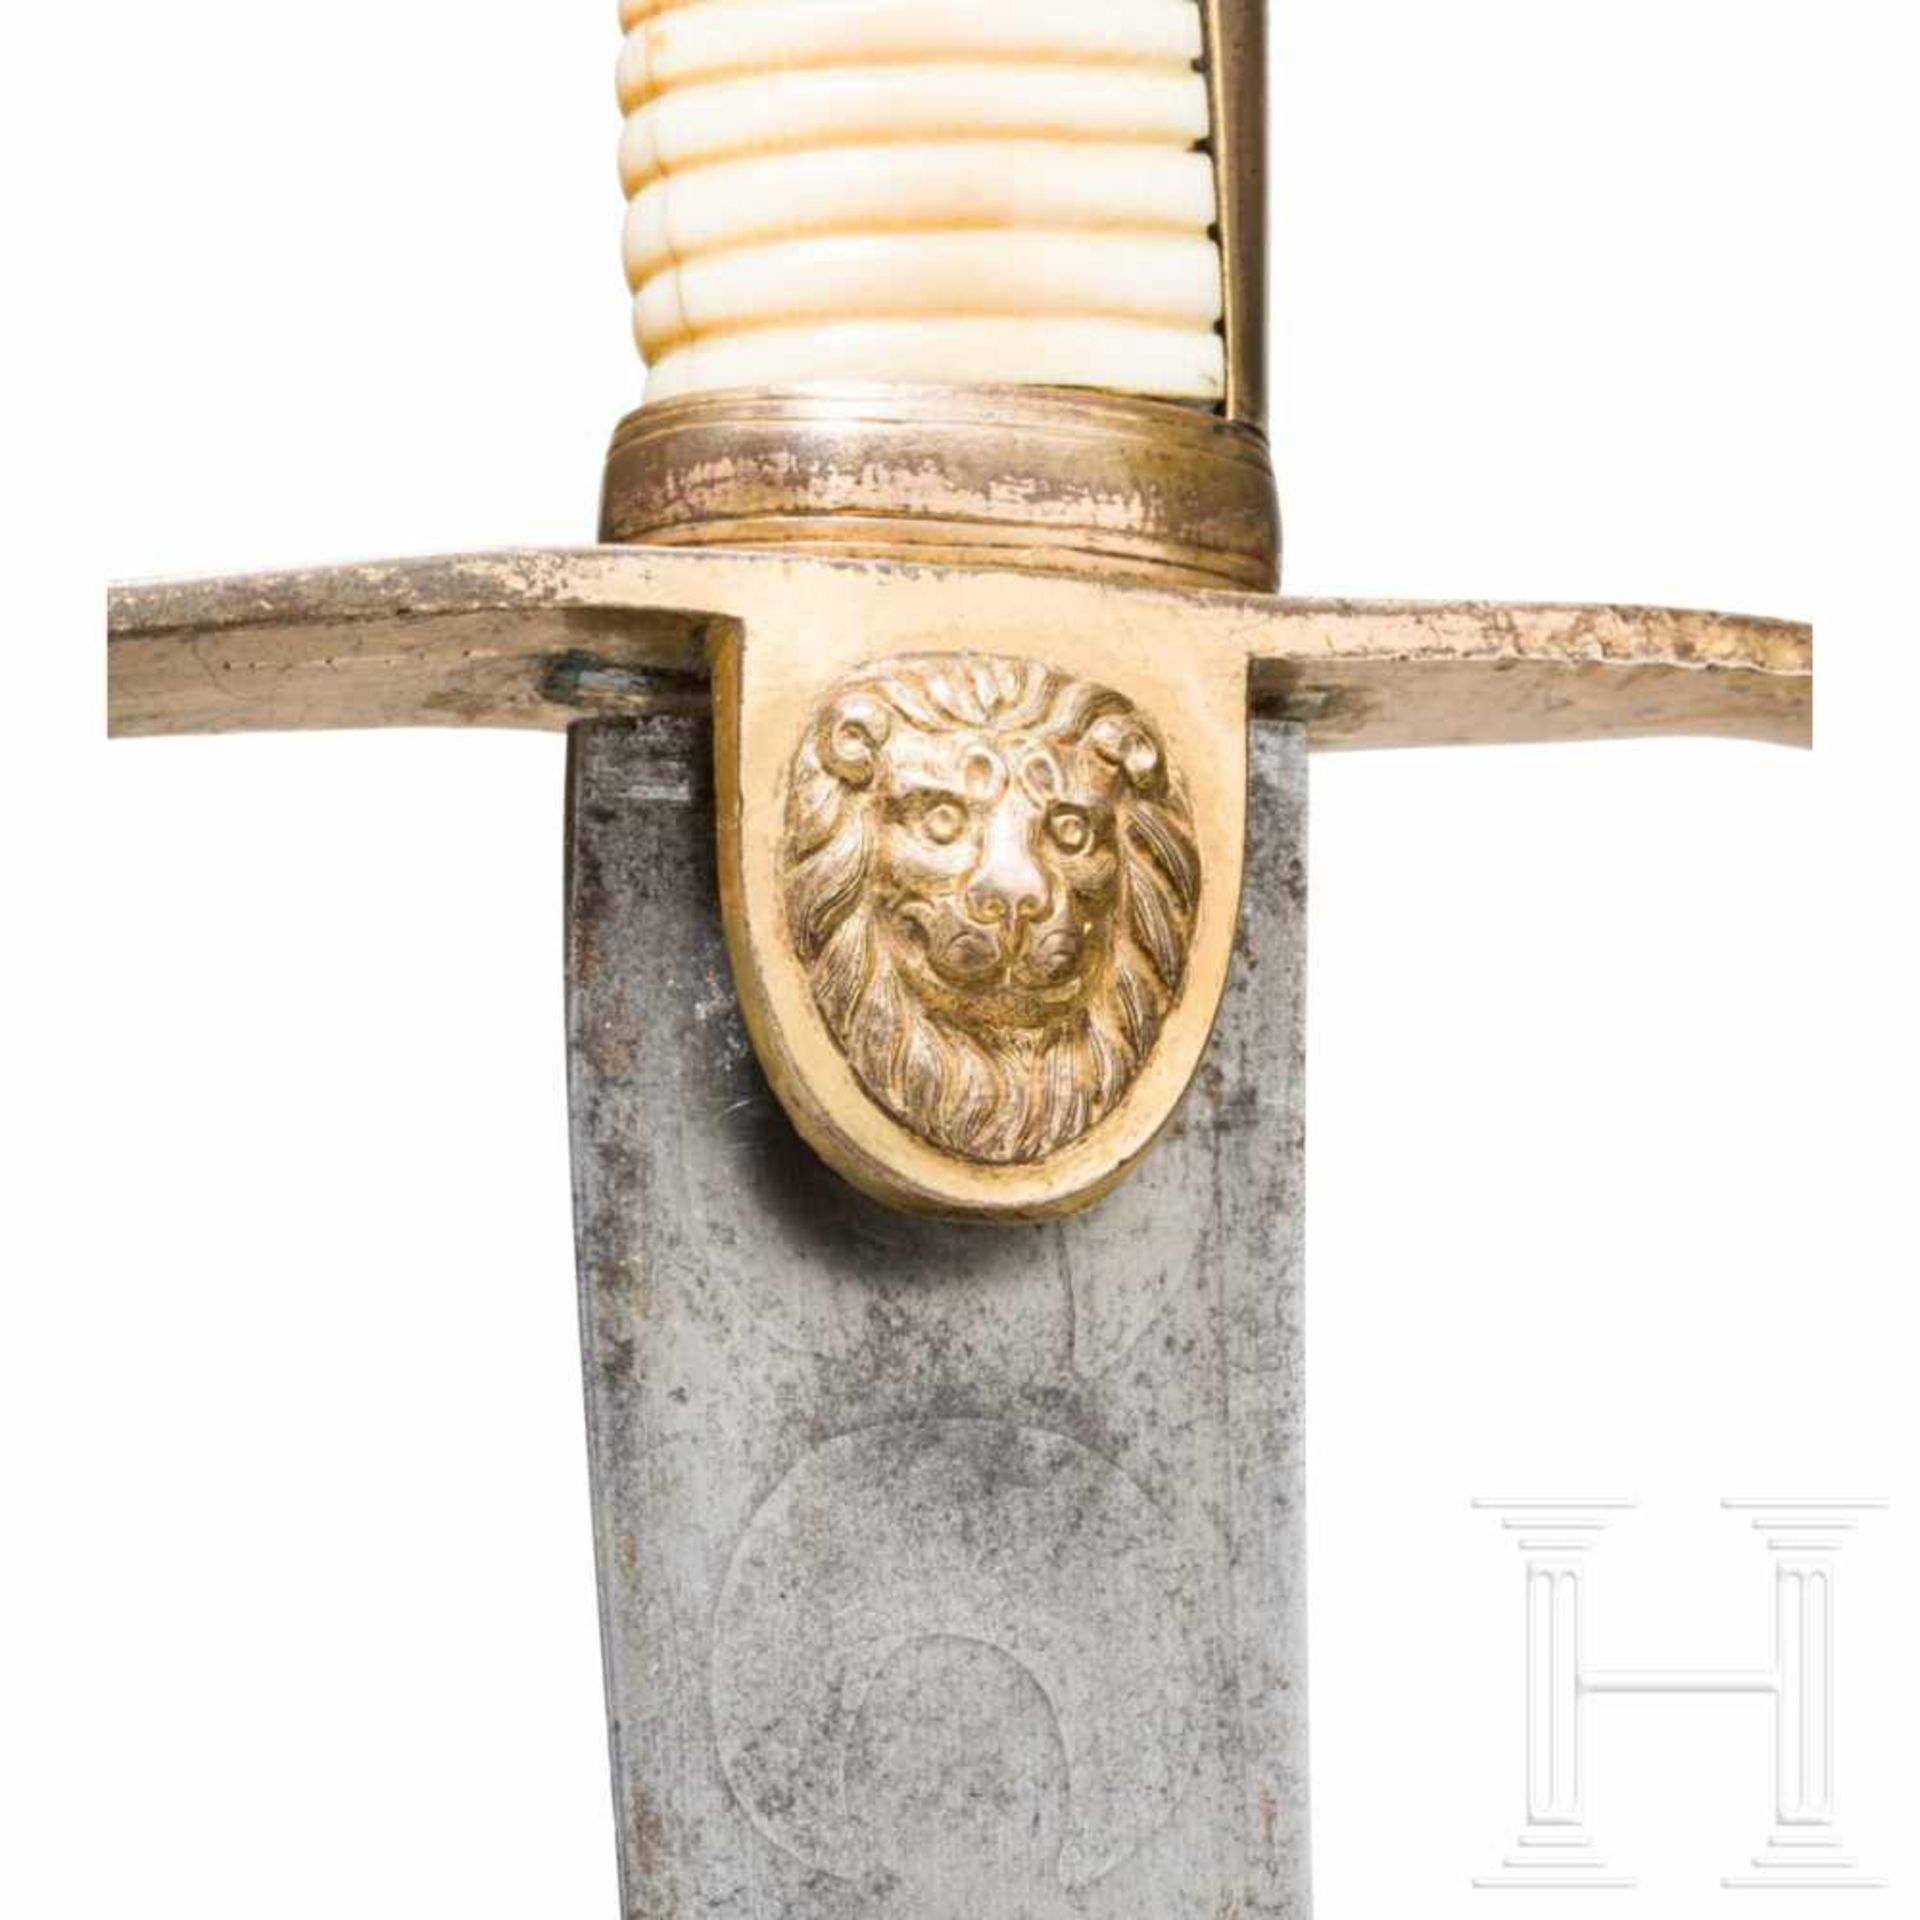 A sabre for officers of the Royal Navy in the style of the so-called “Nile swords“, 1798Distinctly - Bild 5 aus 10